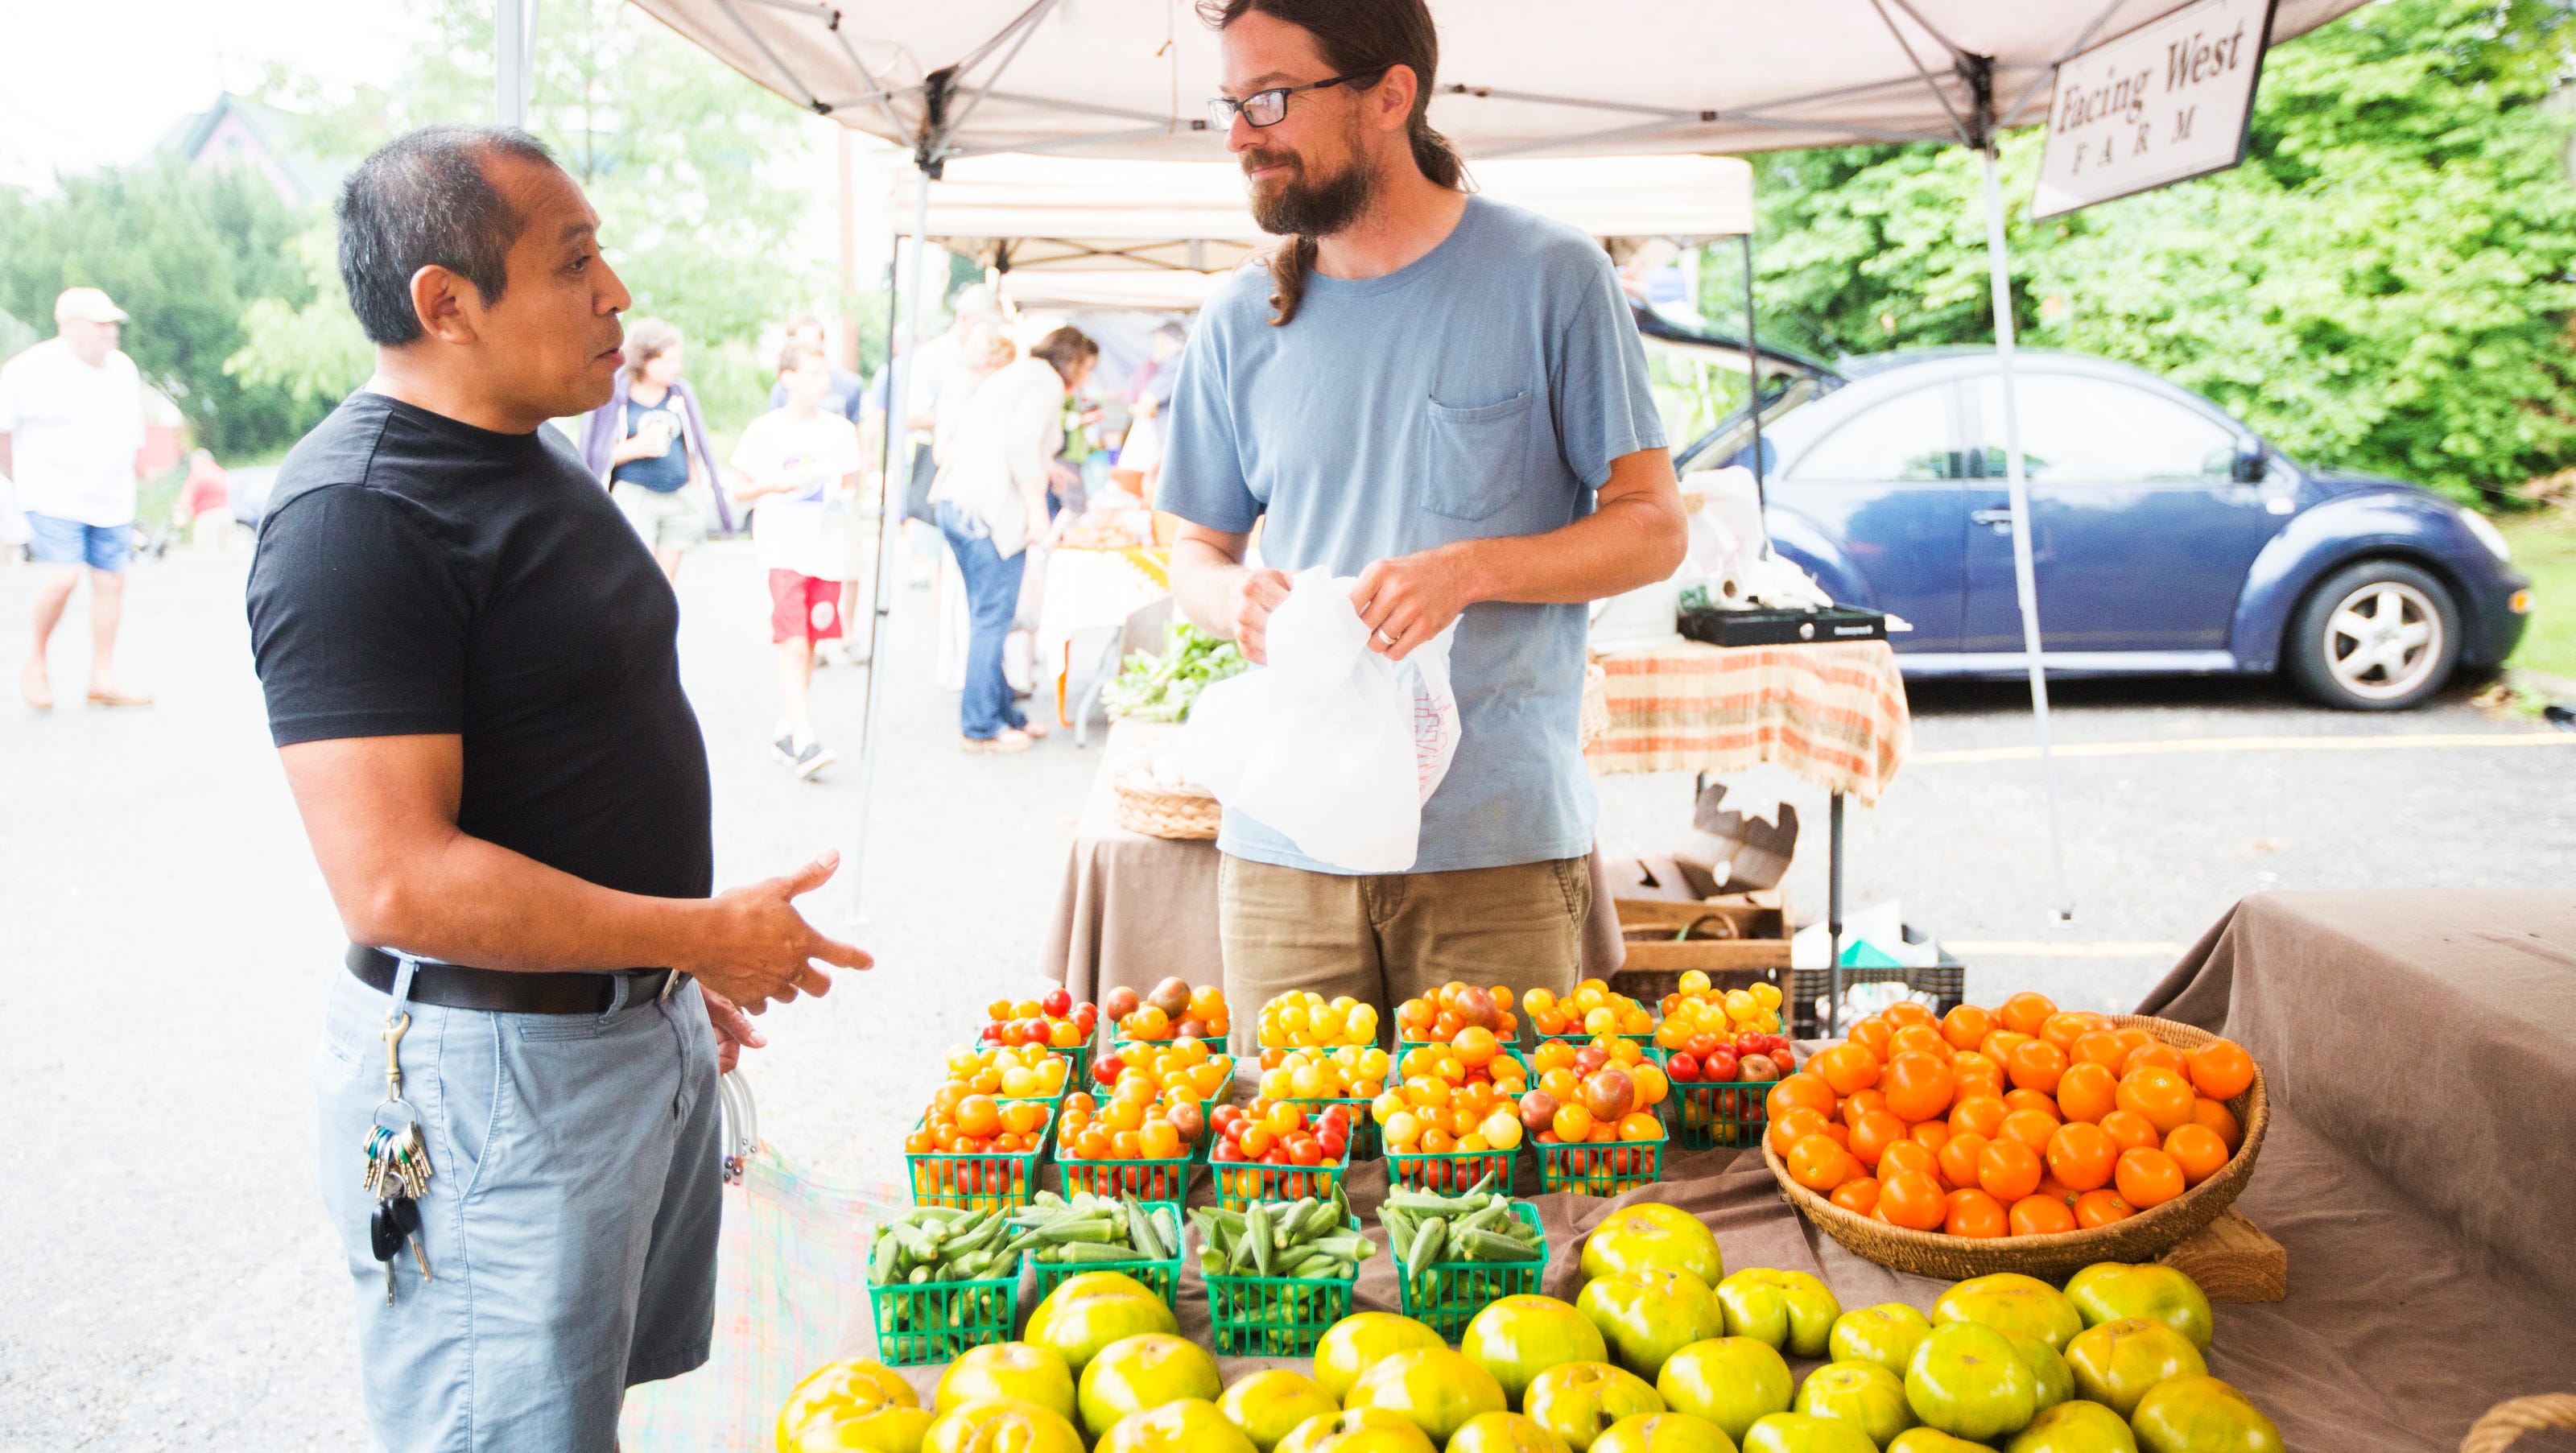 Louisville farmers markets 2022 A look at what markets are open